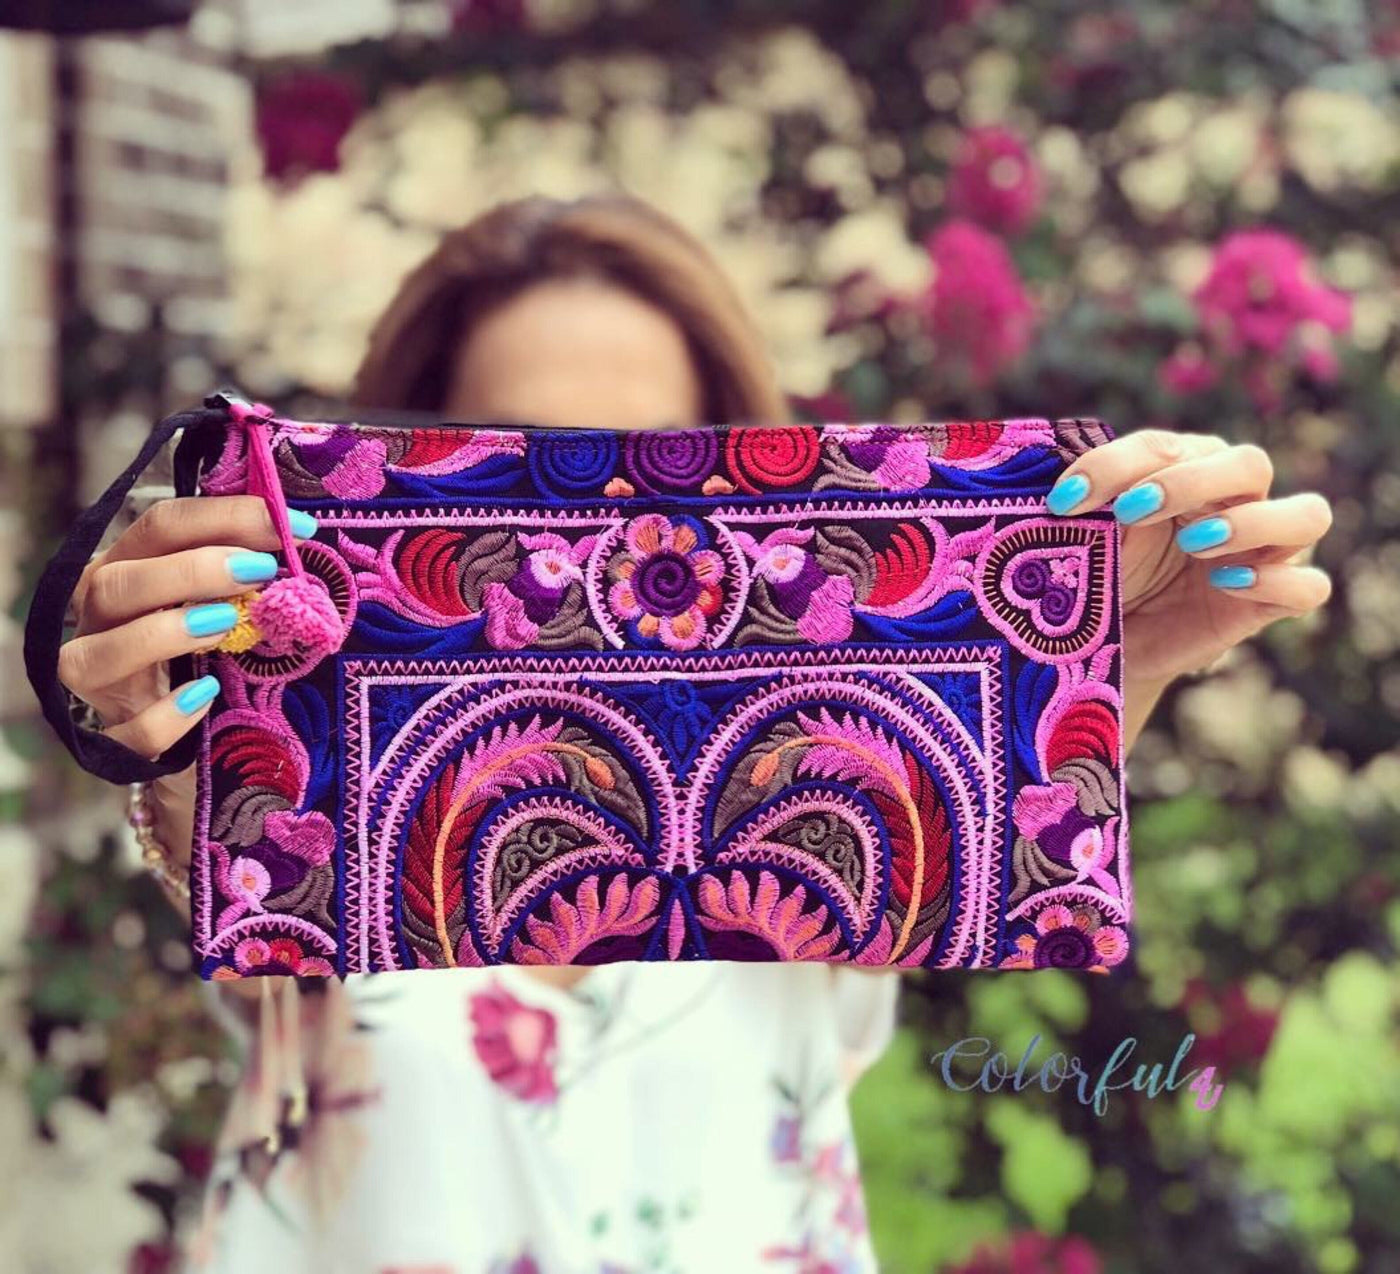 Colorful Embroidered Wristlet Bag - Boho Chic Clutch-Bohemian Clutch ...